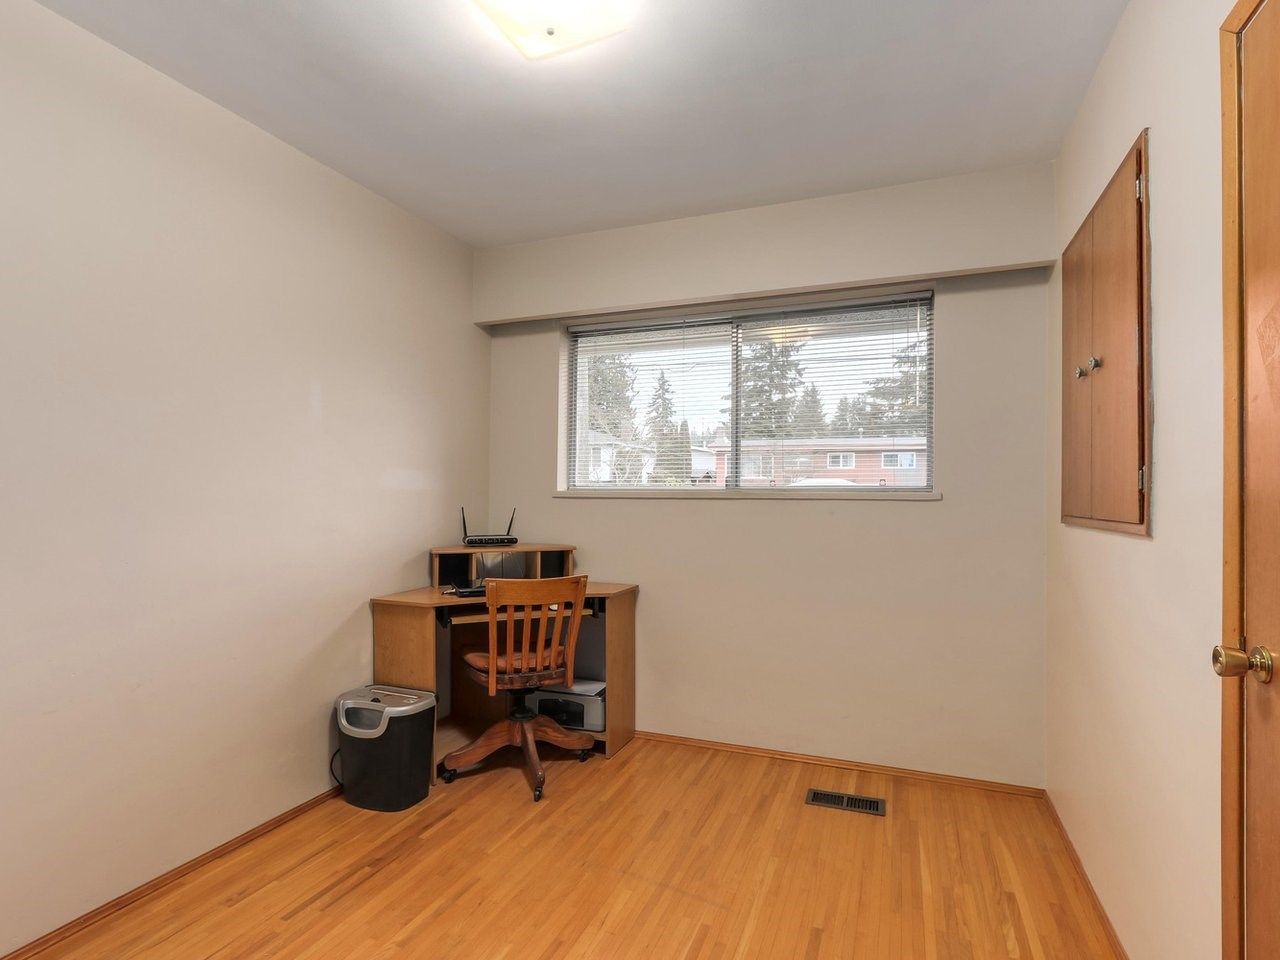 Photo 17: Photos: 1970 ORLAND Drive in Coquitlam: Central Coquitlam House for sale : MLS®# R2330558